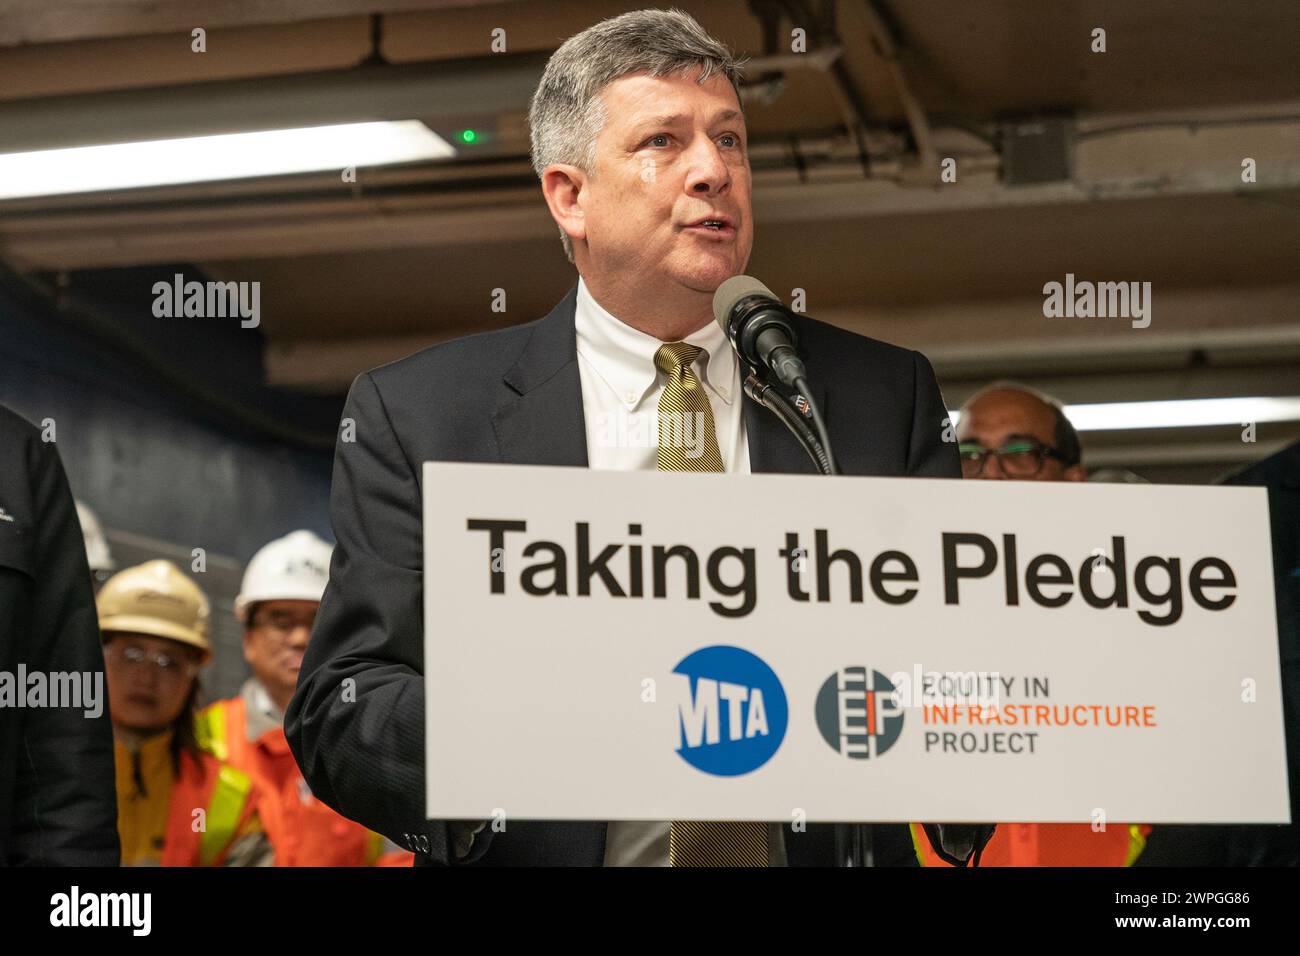 John Porcari, Equity in Infrastructure Project Co-Founder and Former U.S. Deputy Secretary of Transportation speaks during MTA announcement at 14th street subway station in New York on March 7, 2024. Dorval Carter Jr., Chicago Transit Authority President and Equity in Infrastructure Project Co-Chair, John Porcari, Equity in Infrastructure Project Co-Founder and Former U.S. Deputy Secretary of Transportation, Phillip Washington, Denver International Airport CEO and Equity in Infrastructure Project Chair, Janno Lieber, MTA Chair and CEO signed a pledge to promote minorities and women owned busin Stock Photo